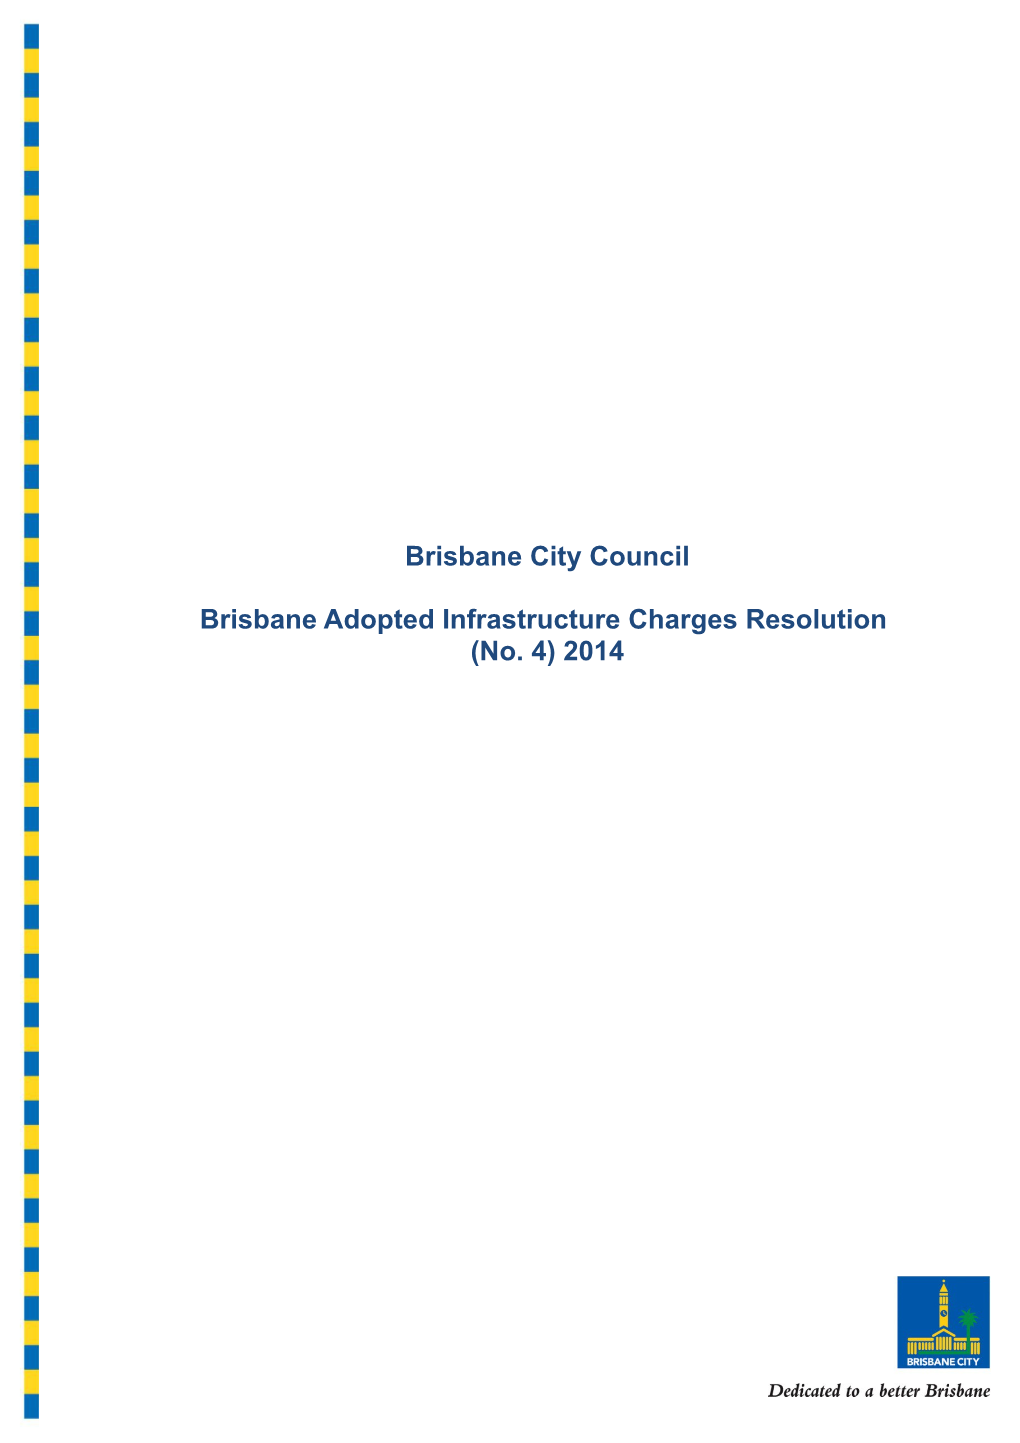 Brisbane Adopted Infrastructure Charges Resolution No 4